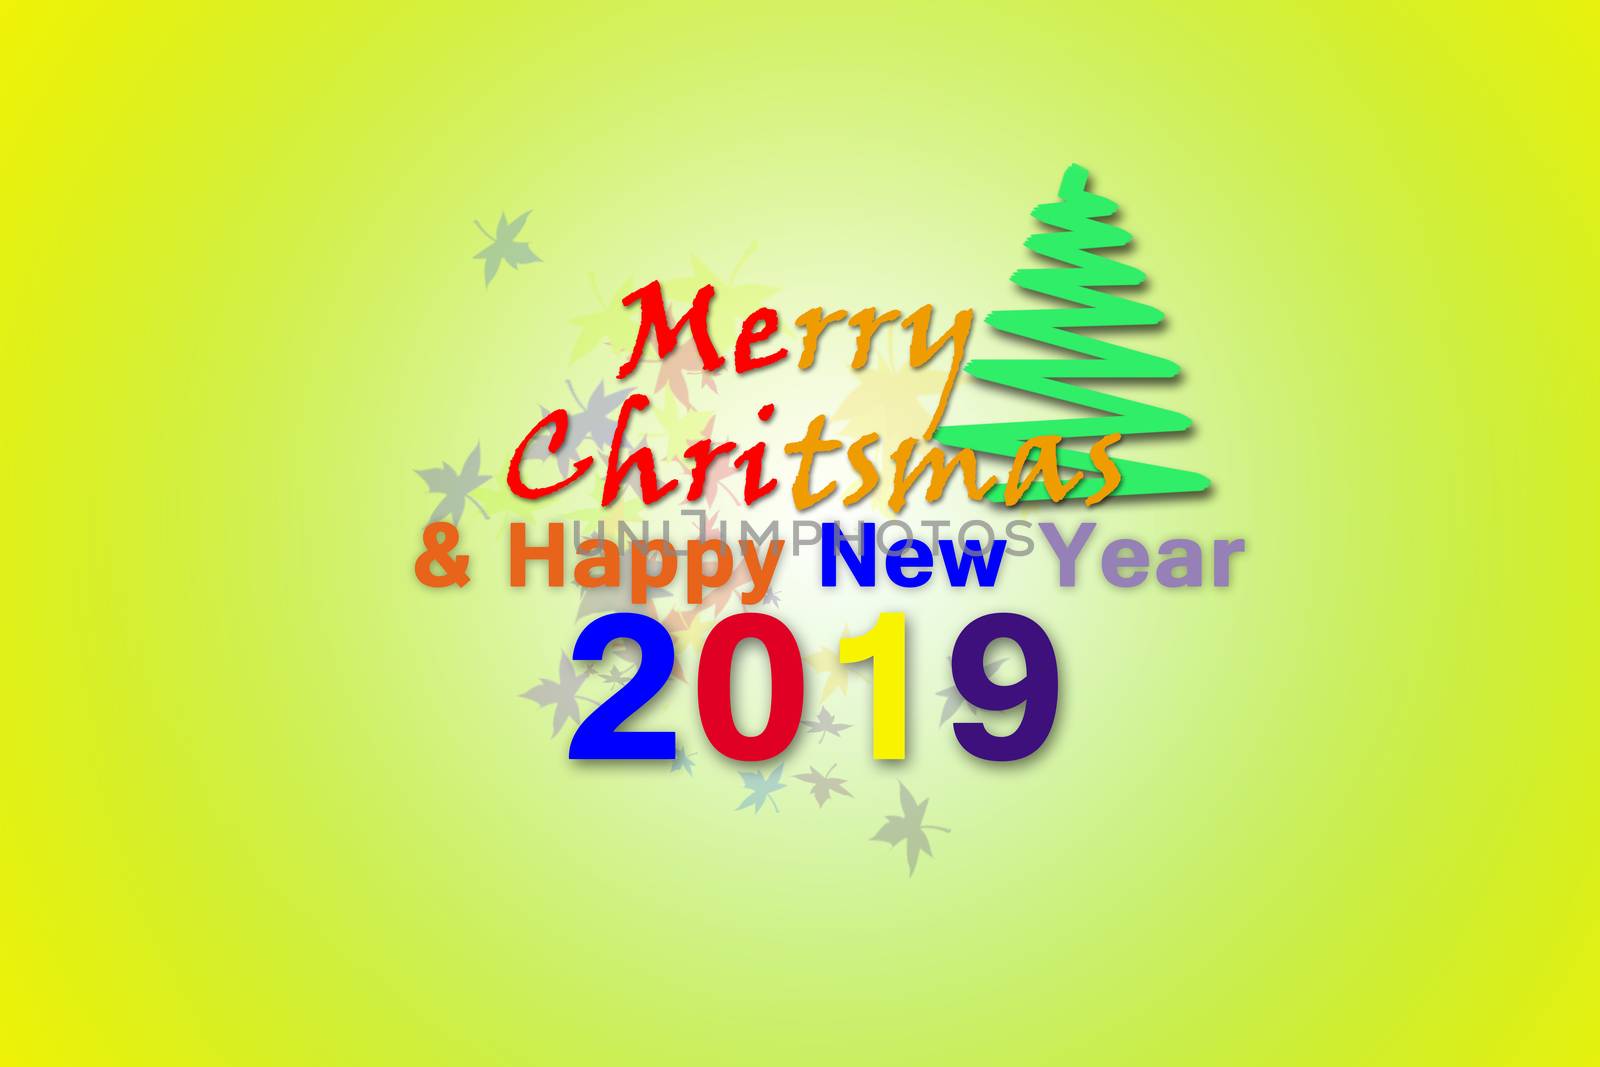 Merry Christmas and Happy New Year 2019 with colour full Lettering design on lite yellow background.